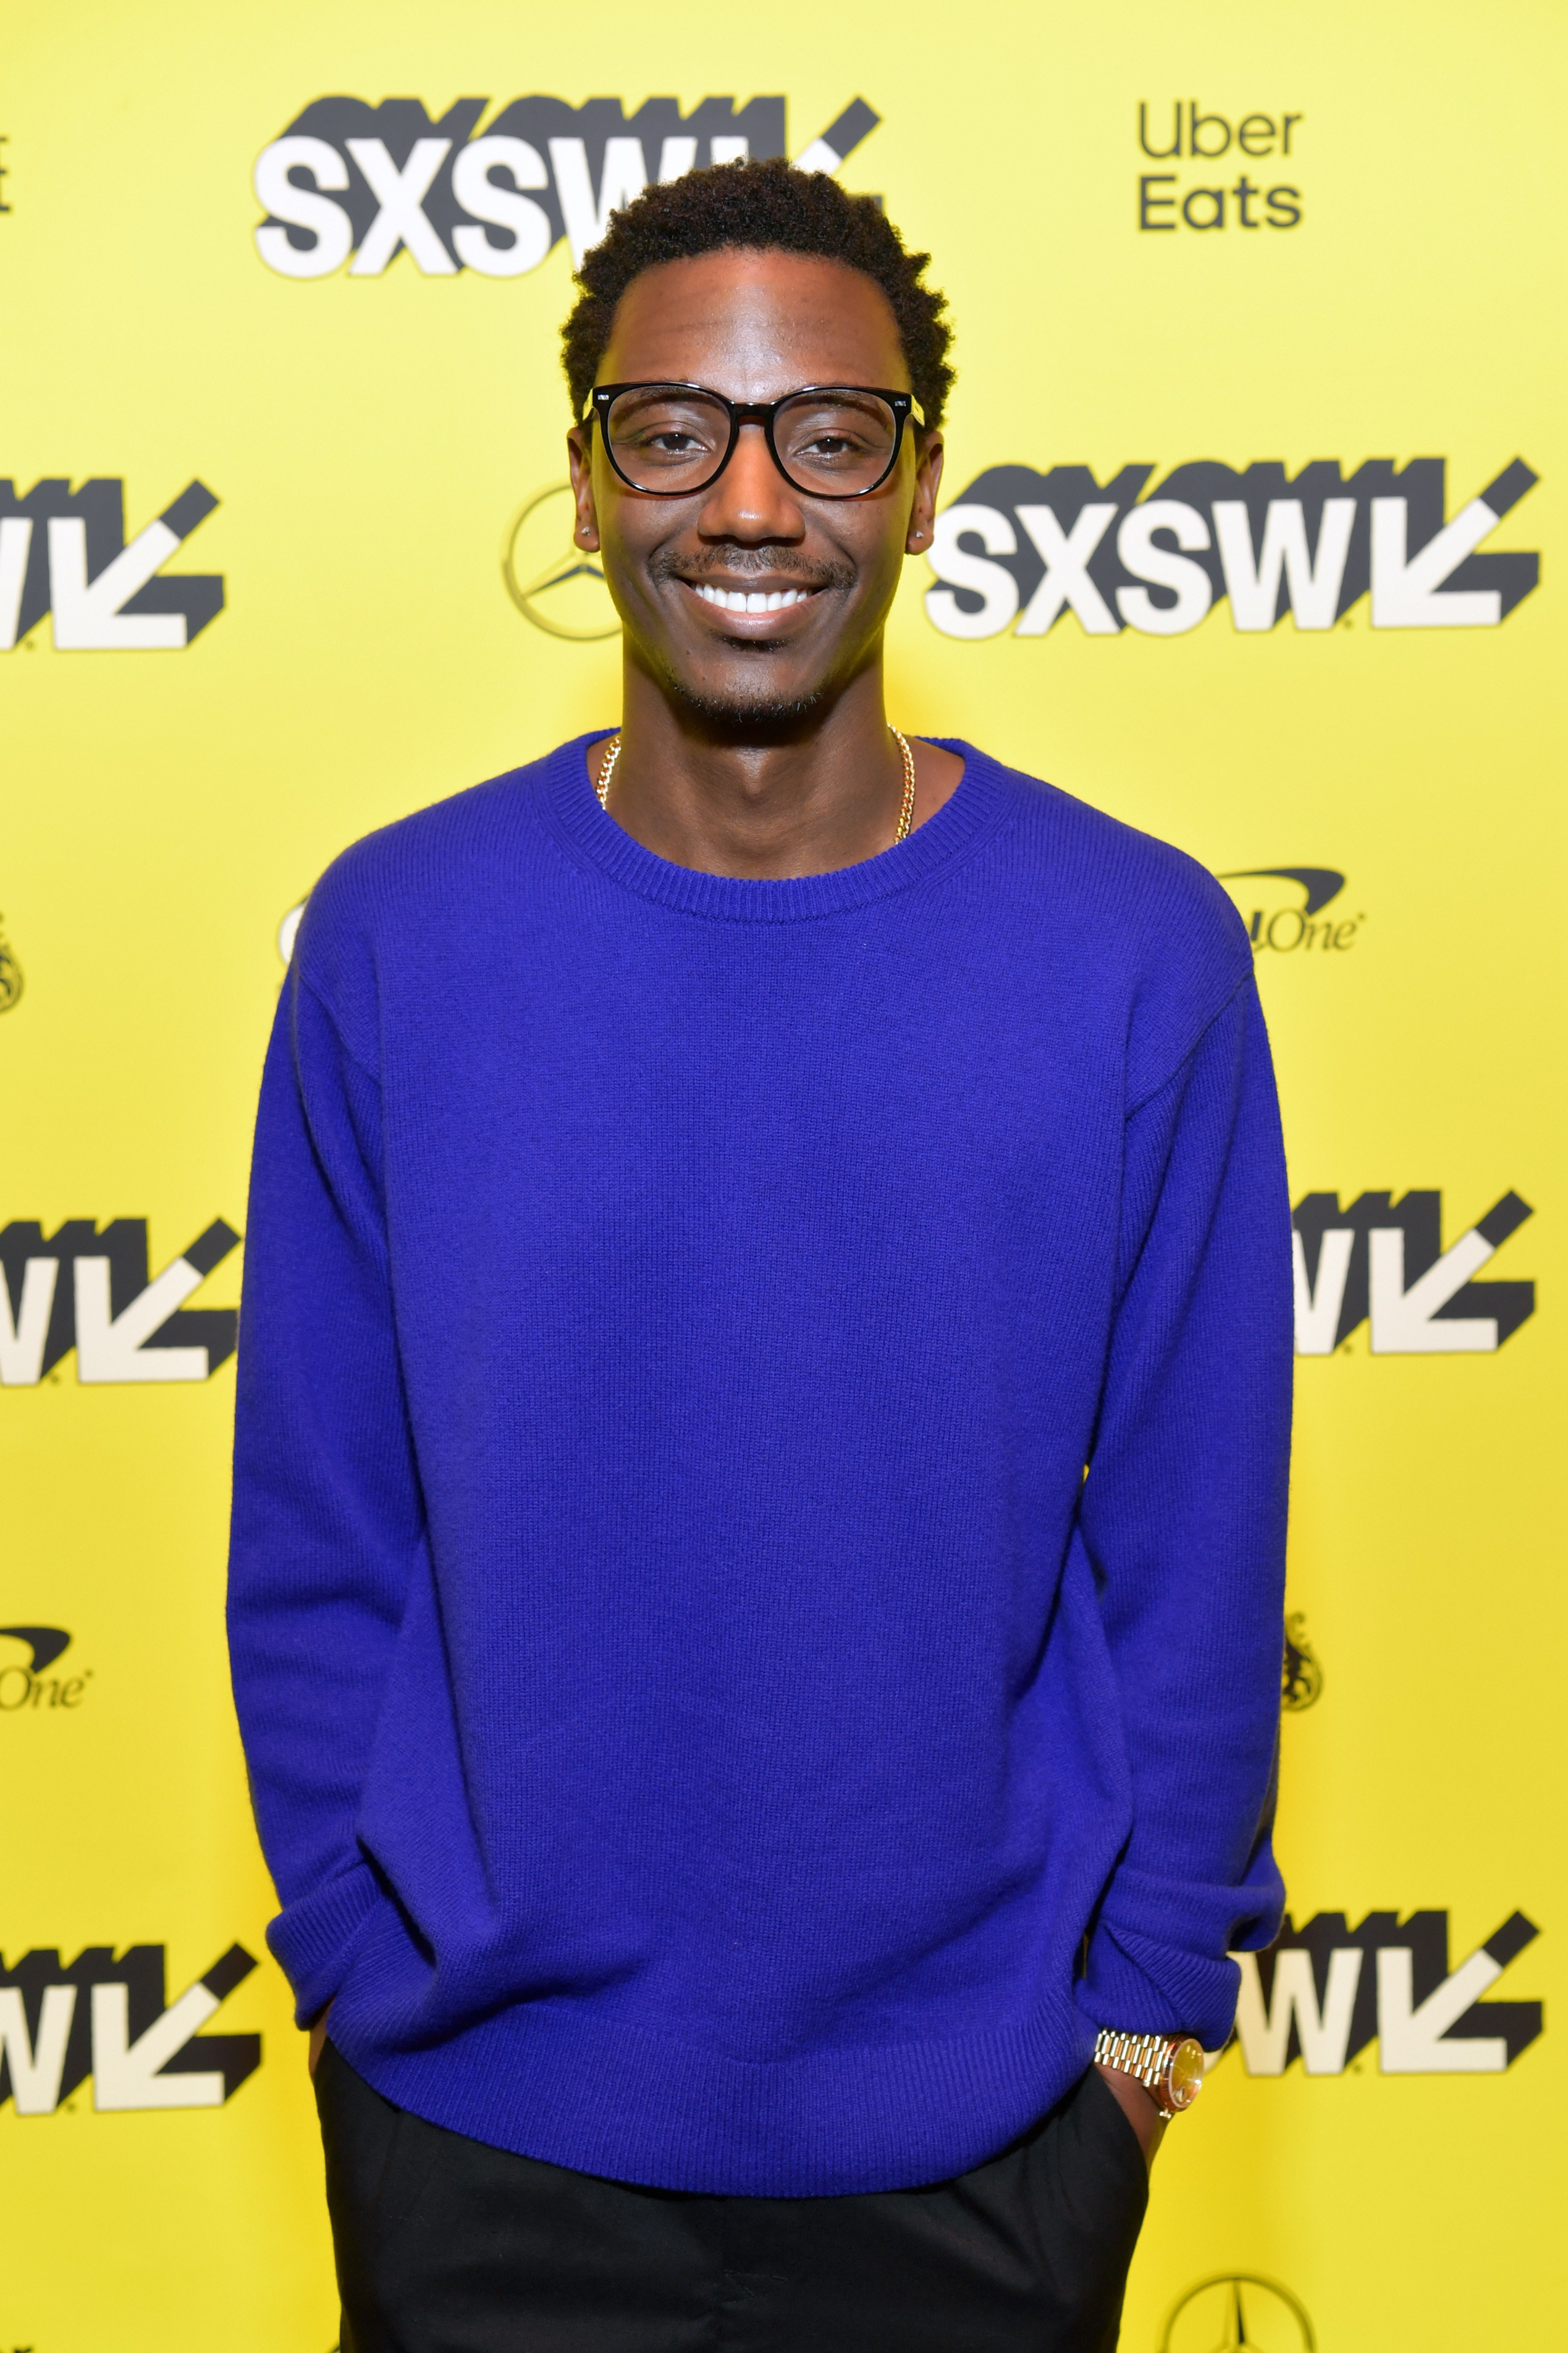 Jerrod Carmichael smiles with his hands in his pockets